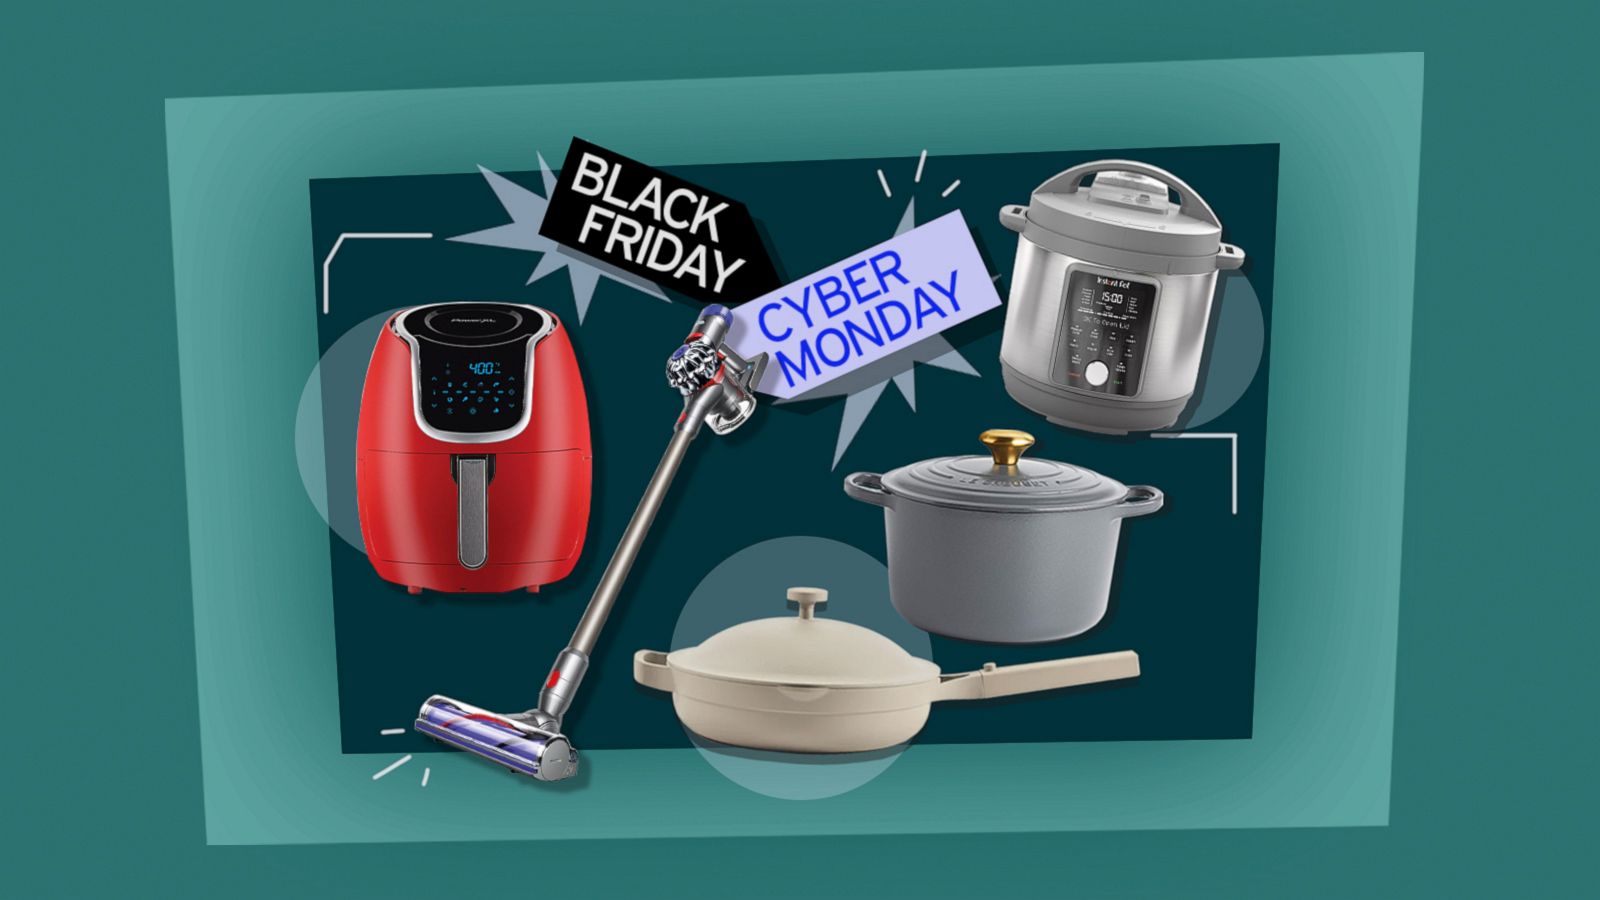 Shop Black Friday and Cyber Monday kitchen and home deals up to 75% off -  Good Morning America